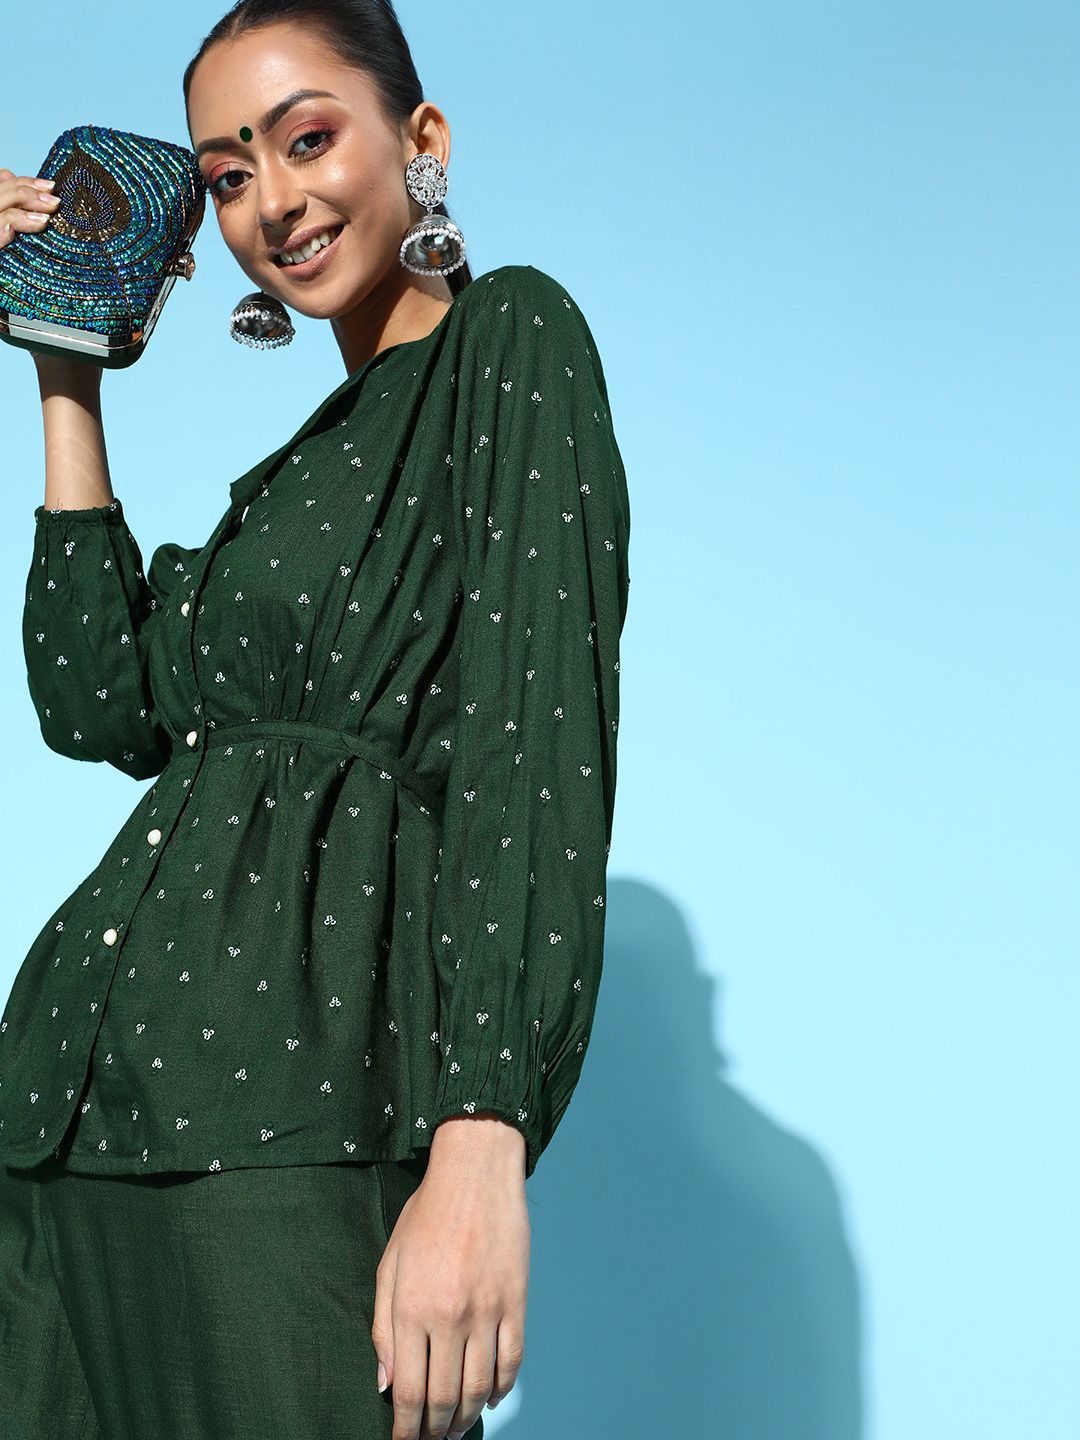 Juniper Enchanting Green Embellished Top with Sleek Palazzos Price in India